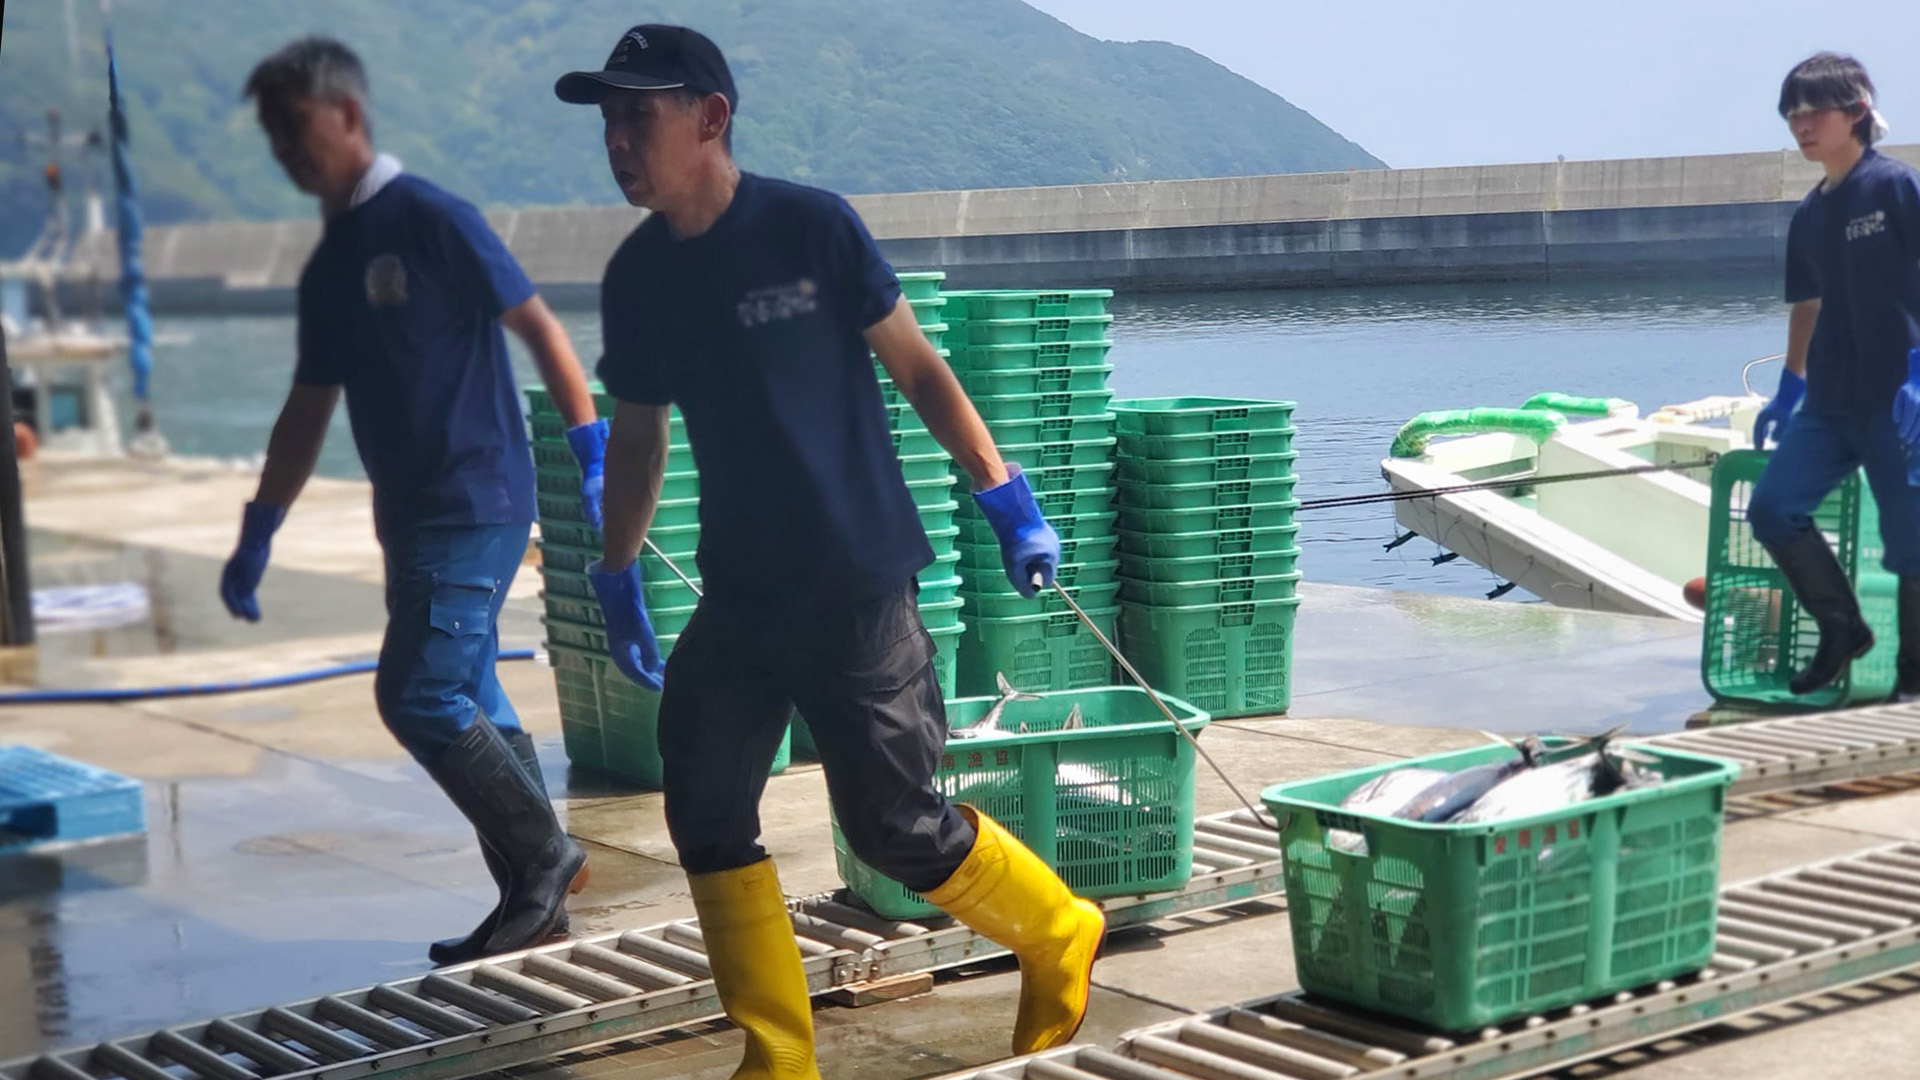 UMIGYO IN SMALL-SCALE FISHERIES IN JAPAN: HOW PROTECTING LIFE ABOVE WATER  LEADS TO PROTECTING LIFE BELOW WATER - IPNLF